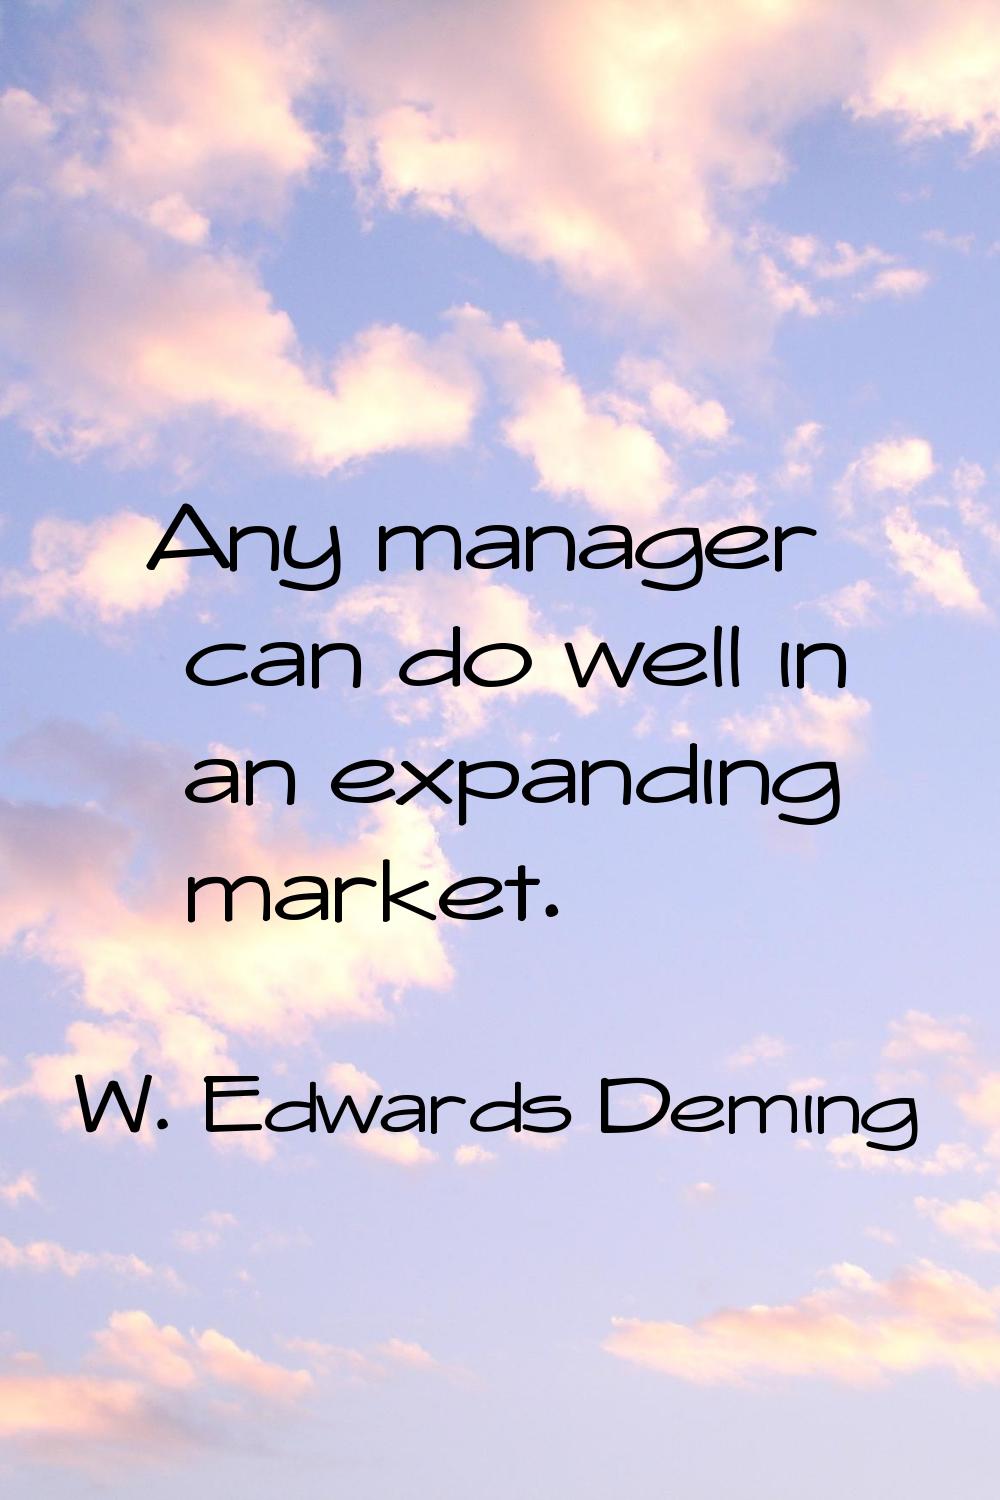 Any manager can do well in an expanding market.